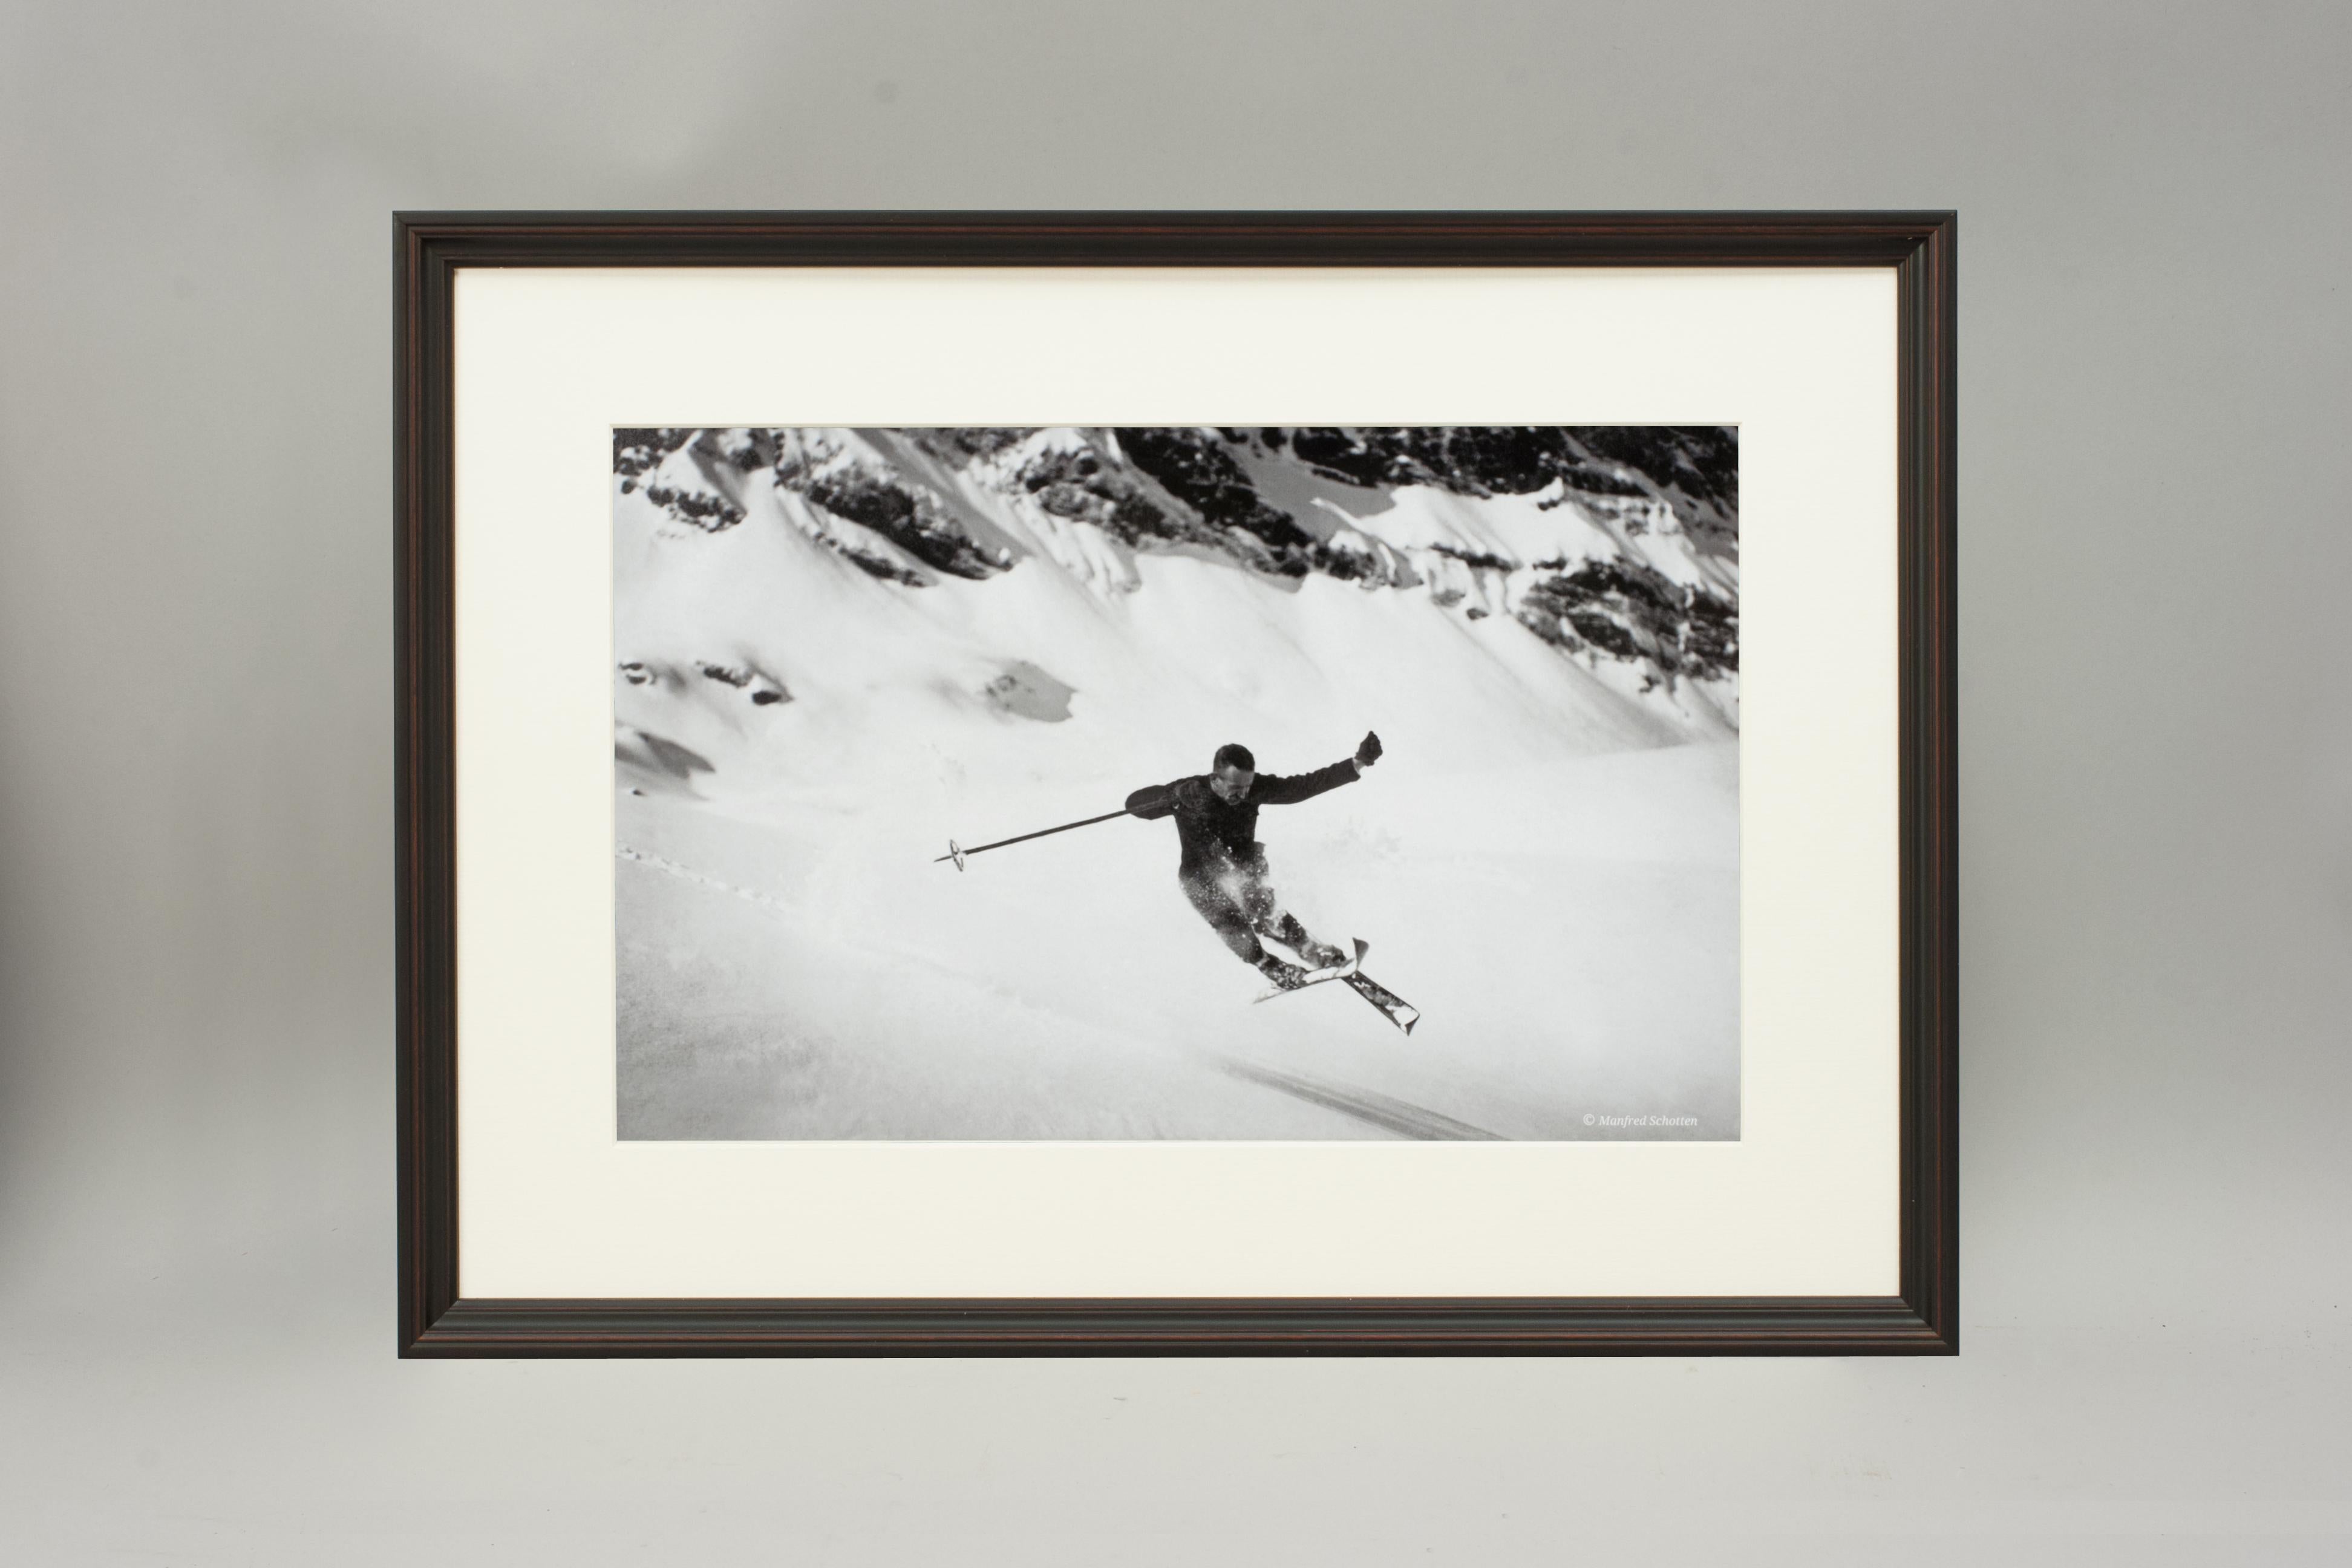 'QUERSPRUNG', a modern framed and mounted black and white photograph after an original 1930's skiing photograph. The frame is black with a burgundy undercoat, the glazing is clarity+ premium synthetic glass. Black & white alpine photos are the